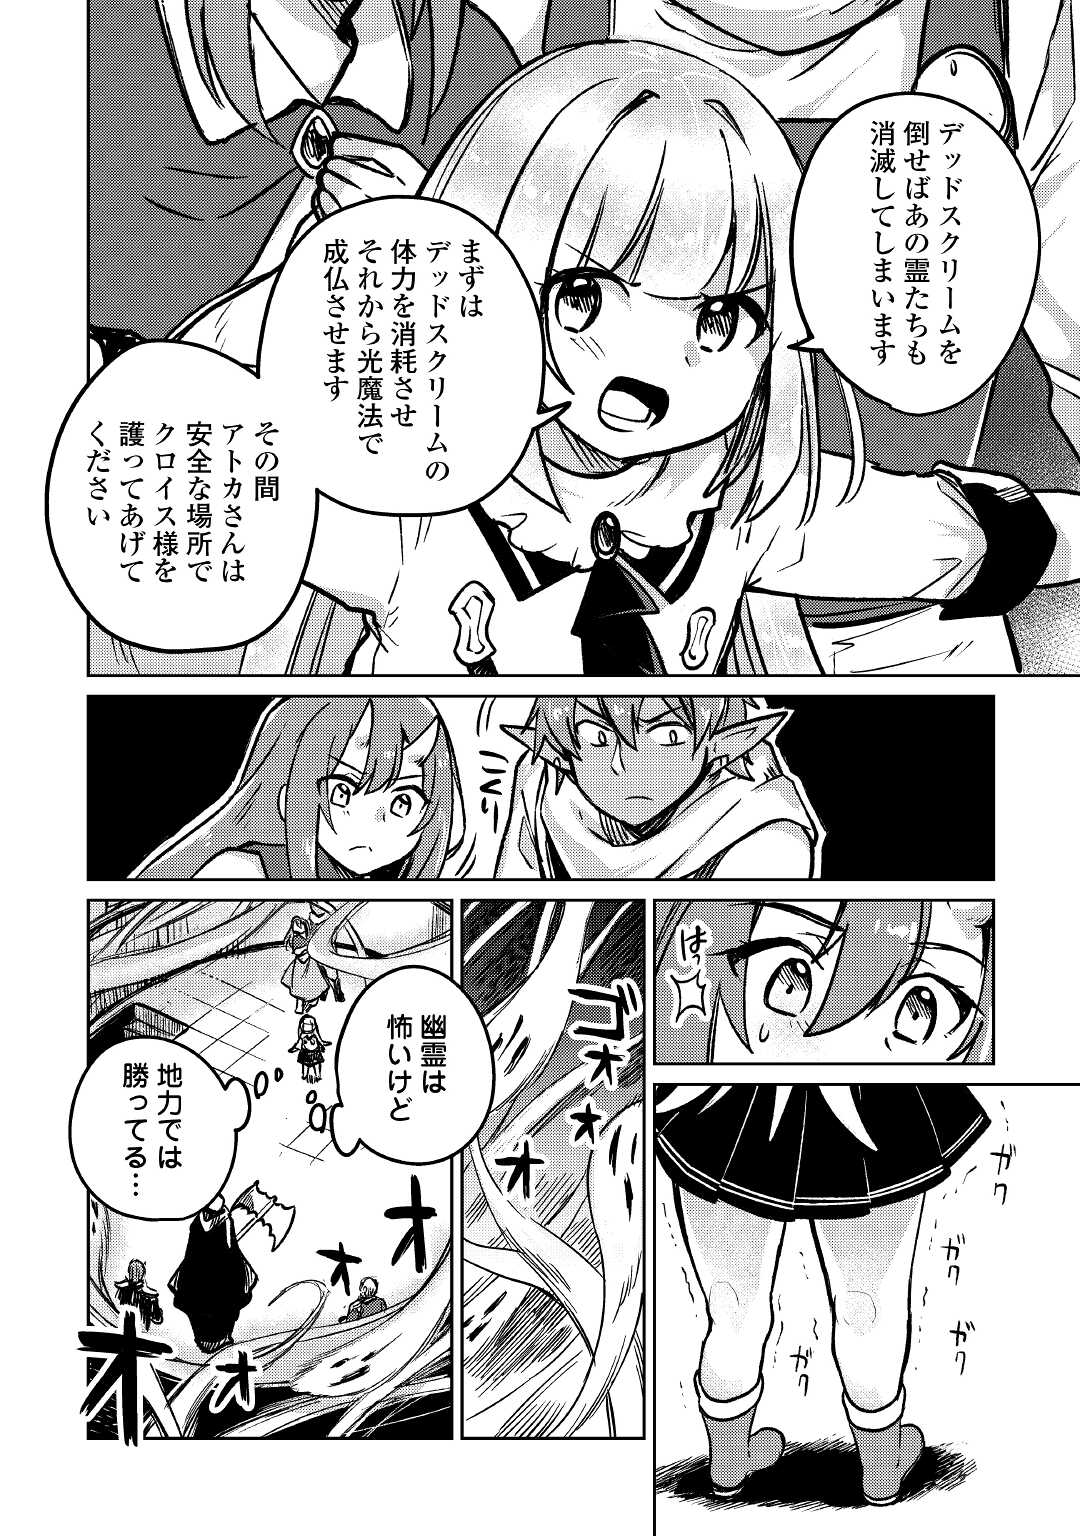 The Former Structural Researcher’s Story of Otherworldly Adventure 第39話 - Page 22